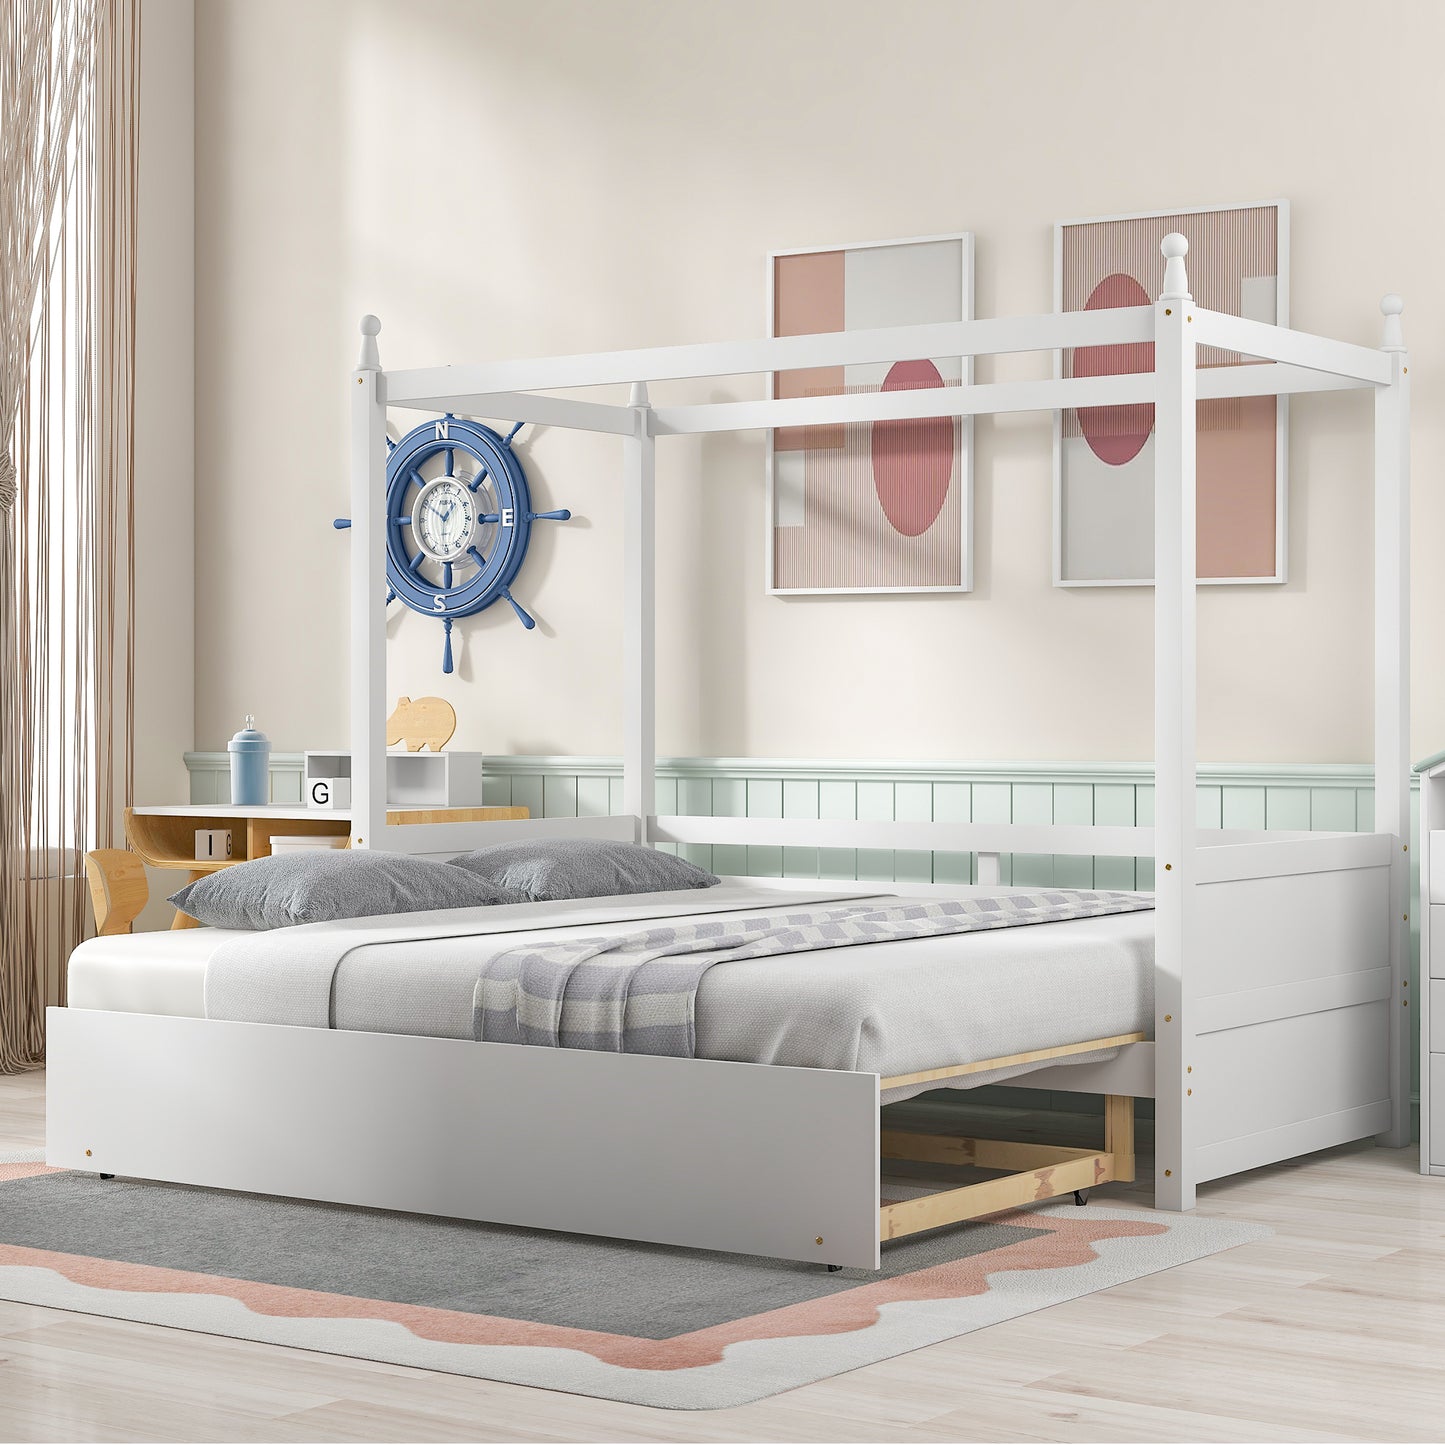 Twin Size Canopy Daybed or Pull-out Platform Bed, White